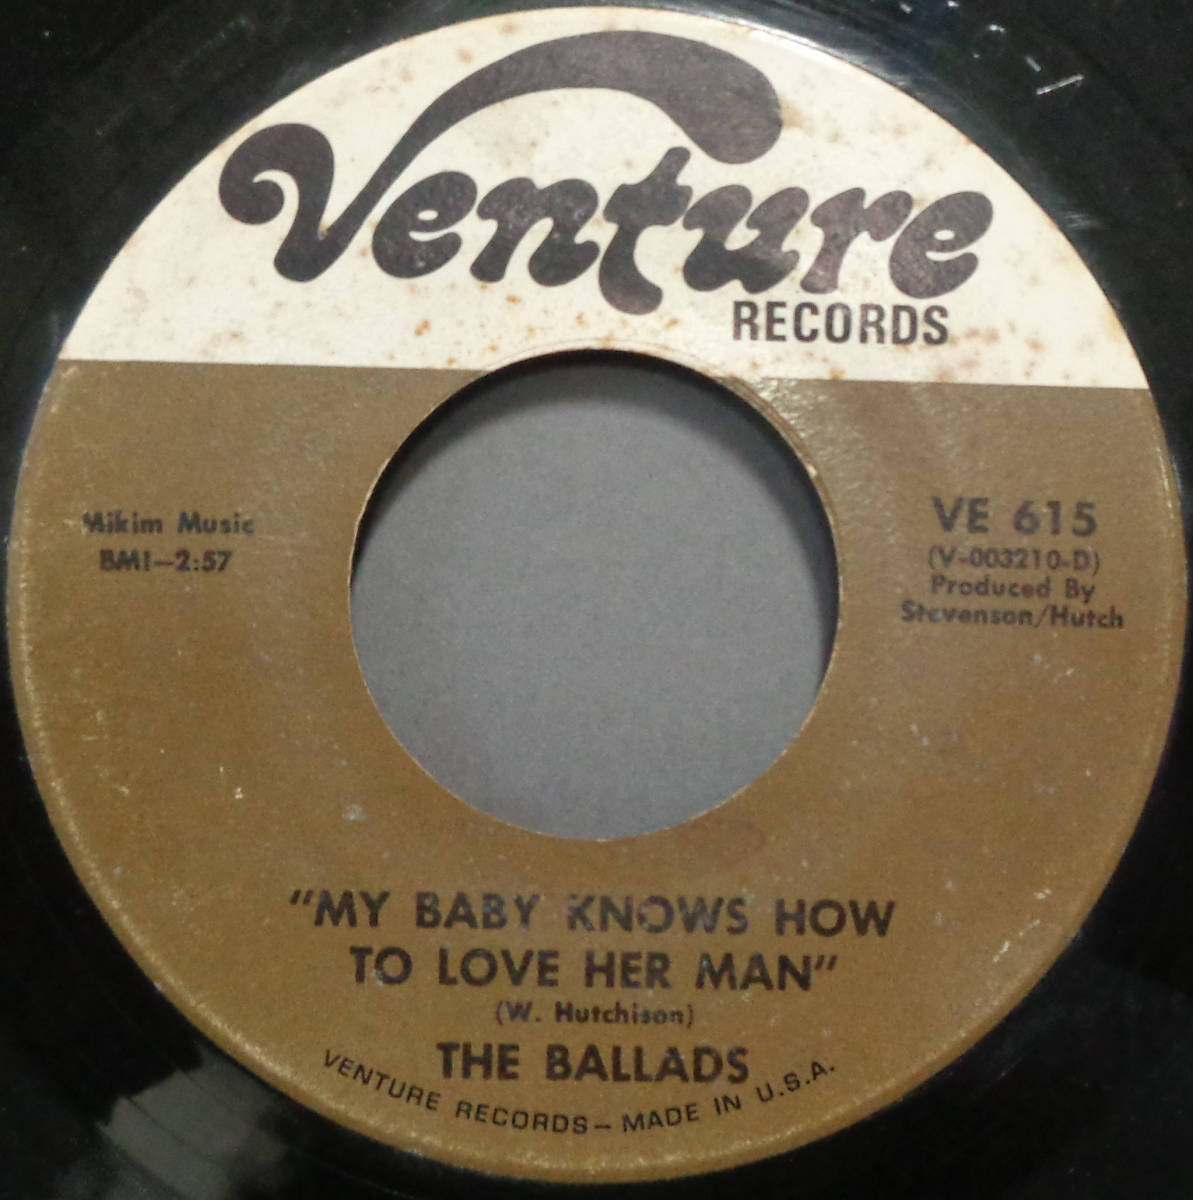 【SOUL 45】BALLADS - MY BABY KNOWS HOW TO LOVE HER MAN / GOD BLESS OUR LOVE (s231118009) の画像1